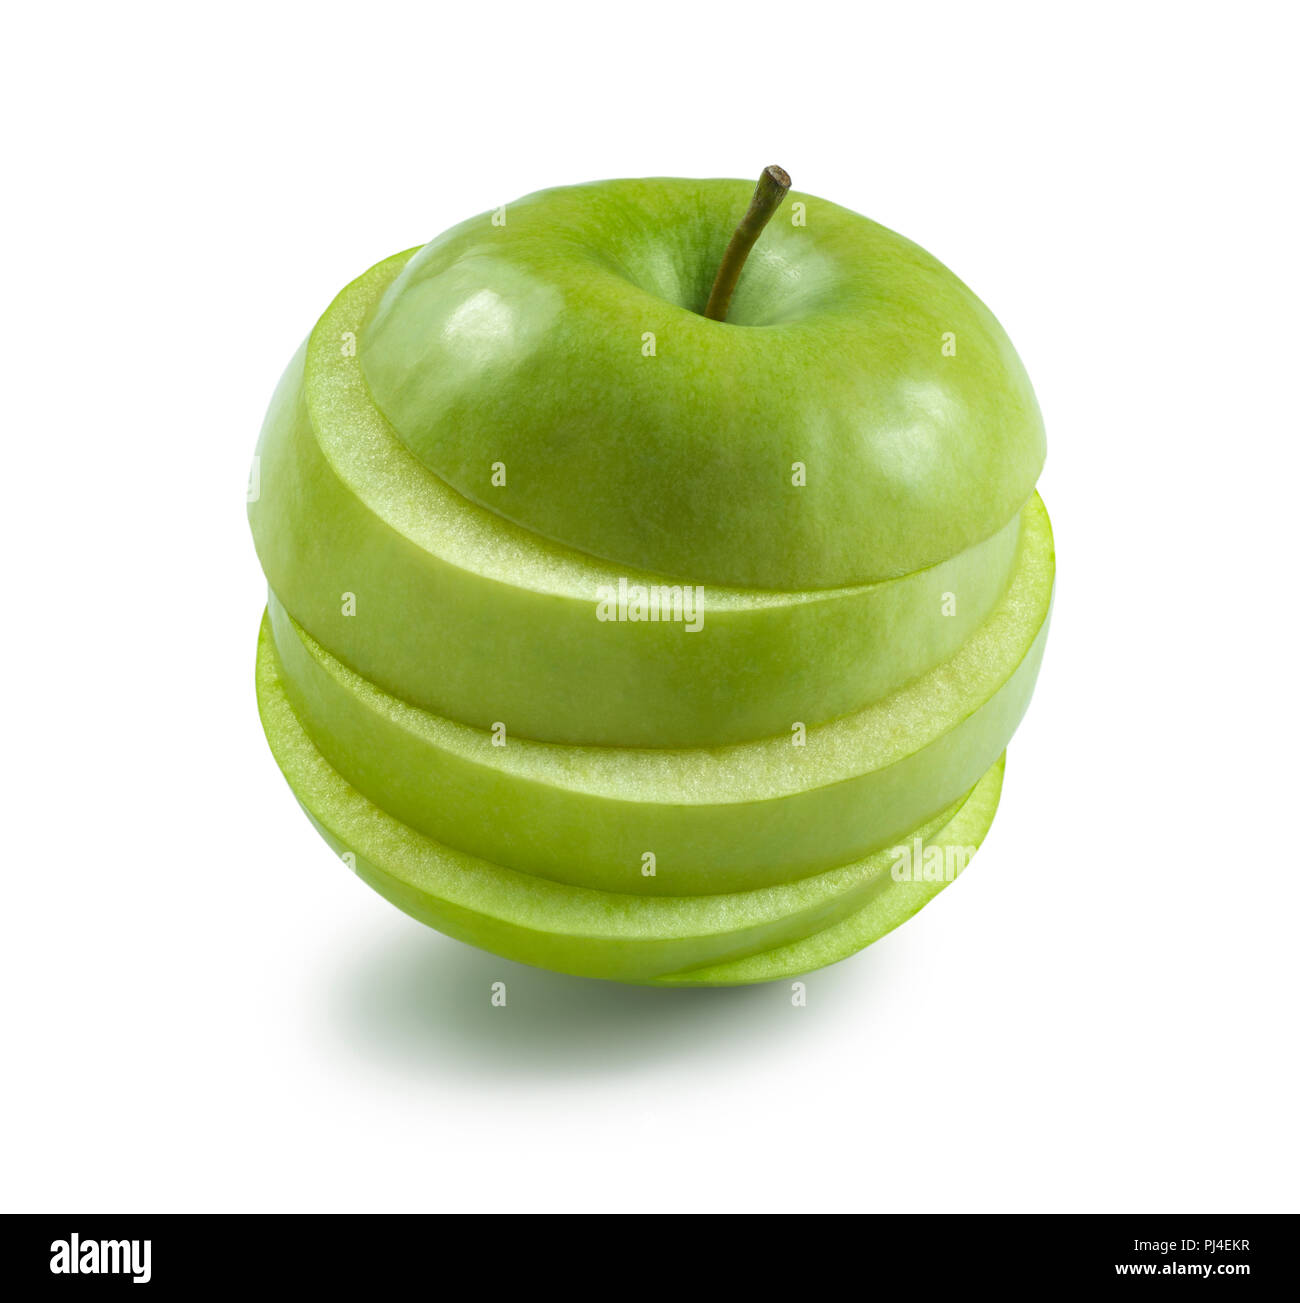 Top sliced green cooking Granny Smith apple on white background isolated Stock Photo